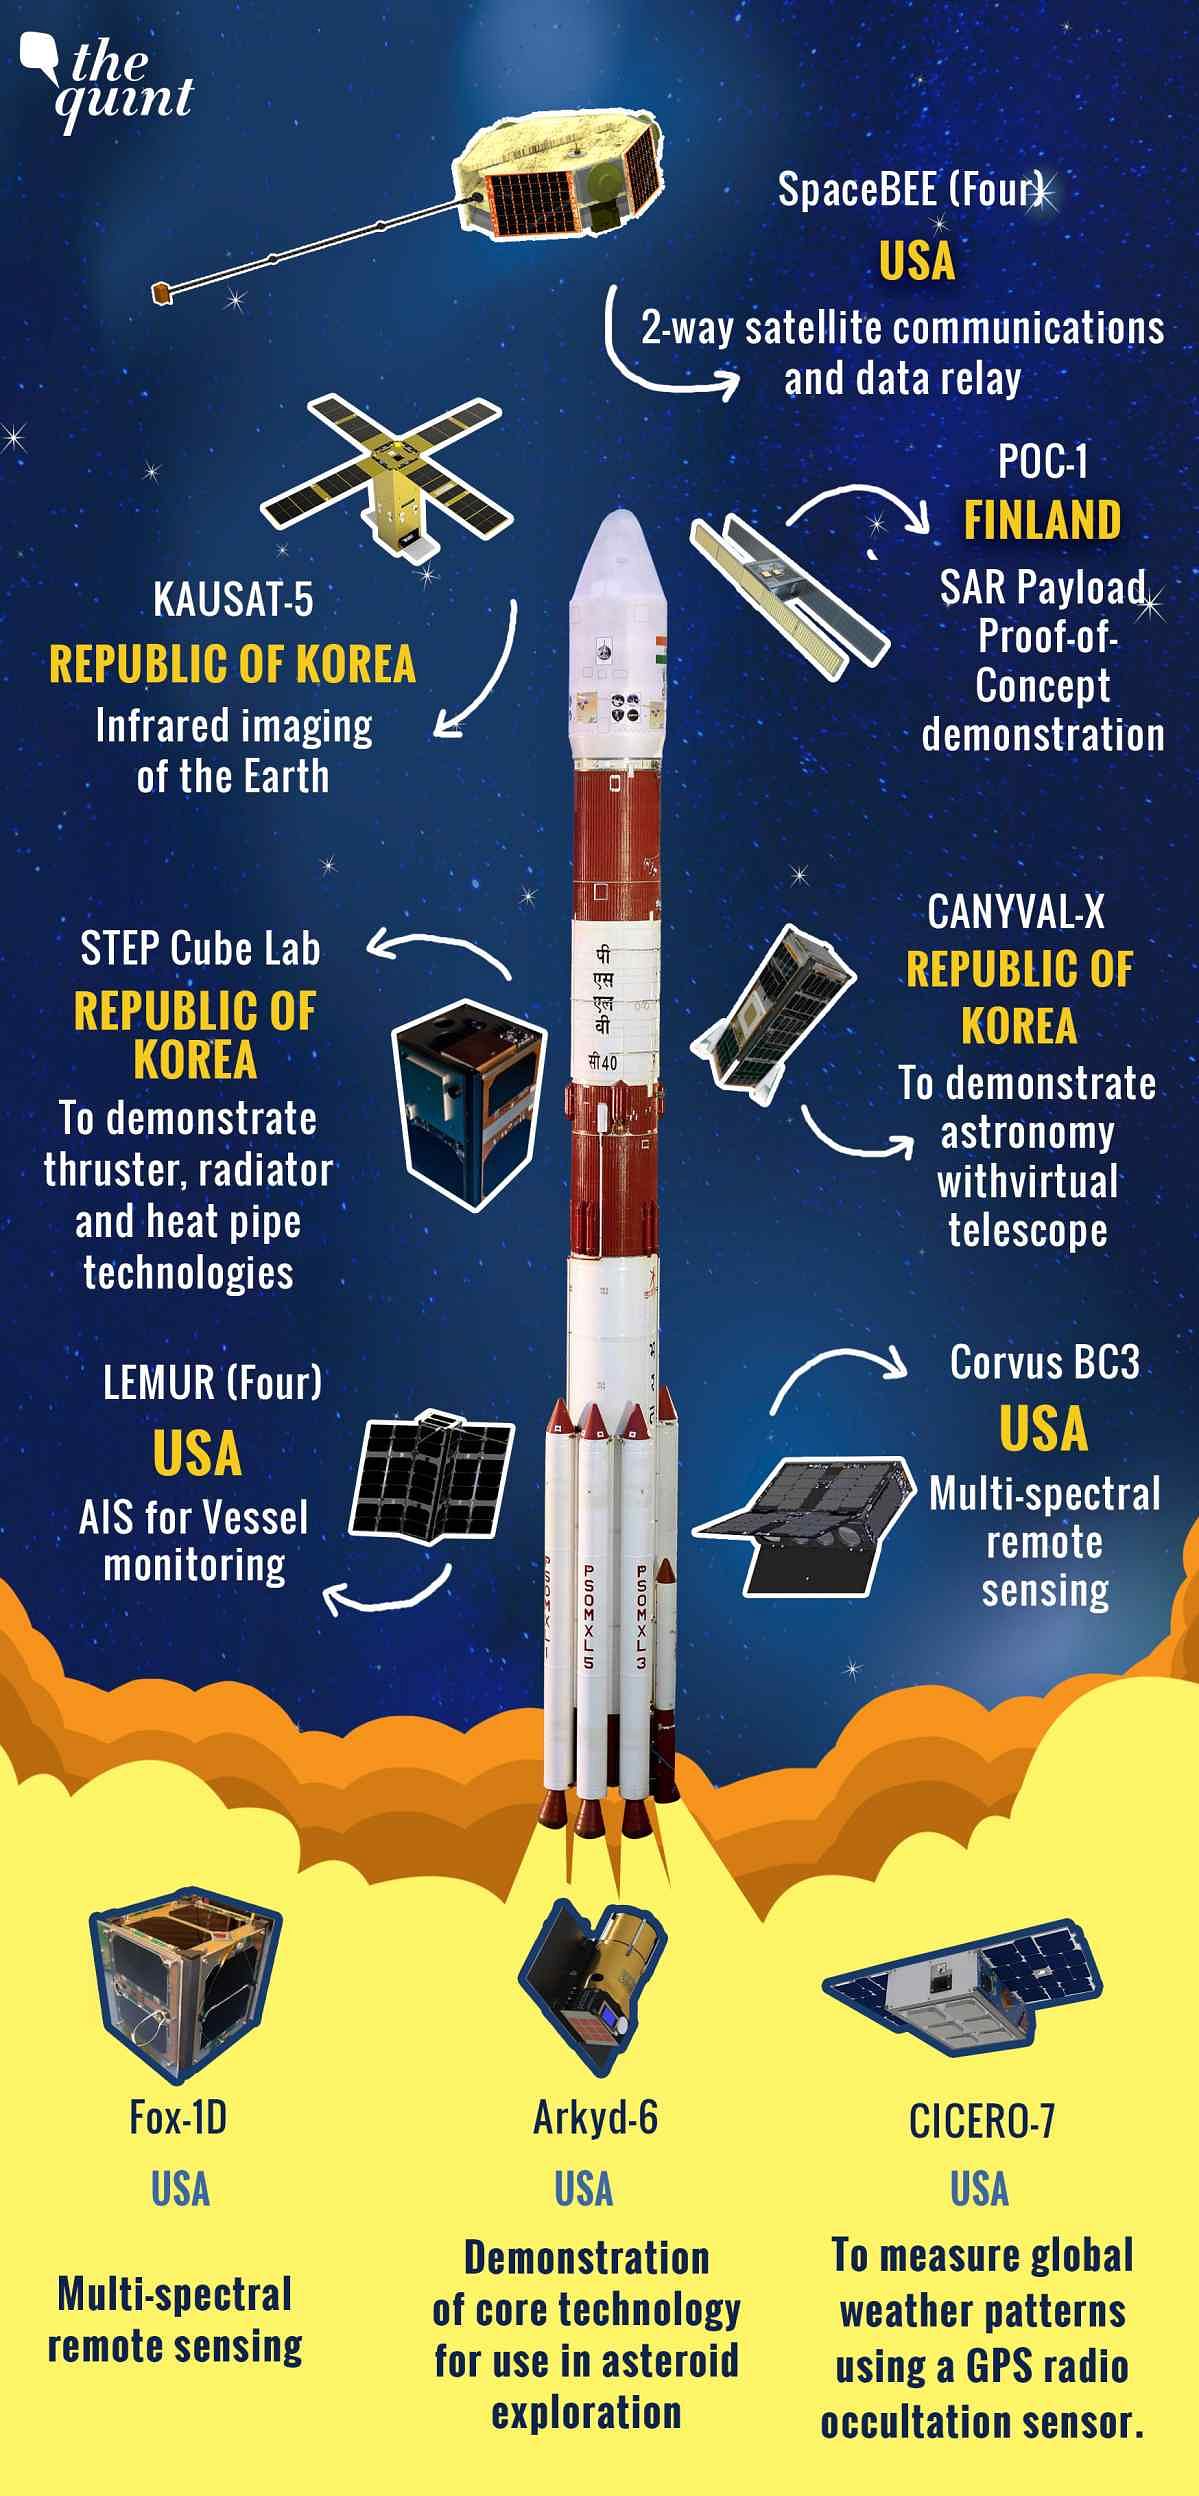 ISRO has had an eventful 2018 with multiple missions. Here’s a review of the top achievements of ISRO in the year.